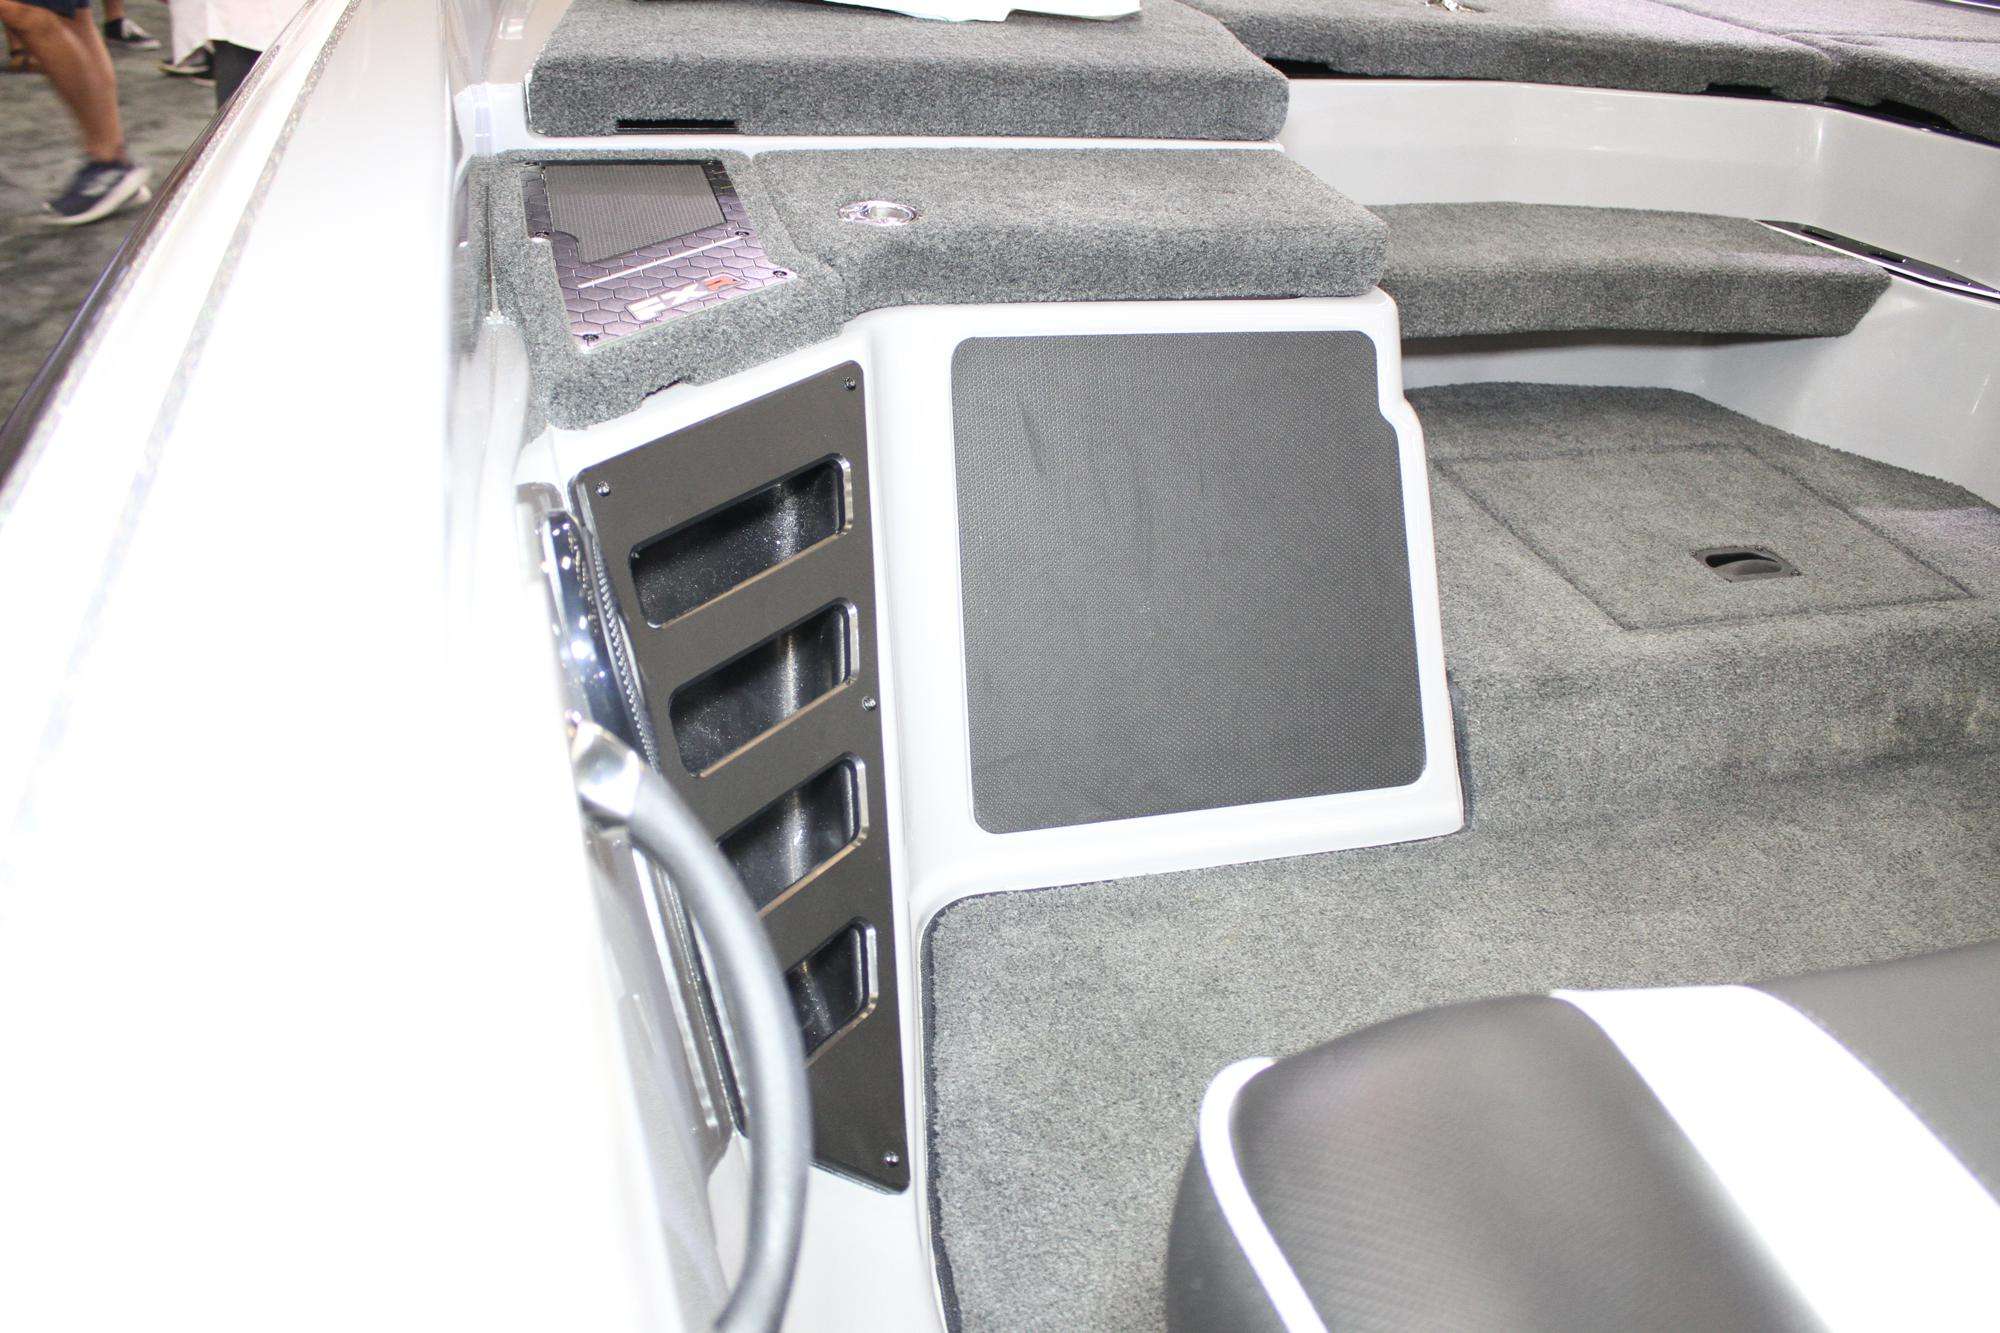 Passenger rod storage from a single console model.